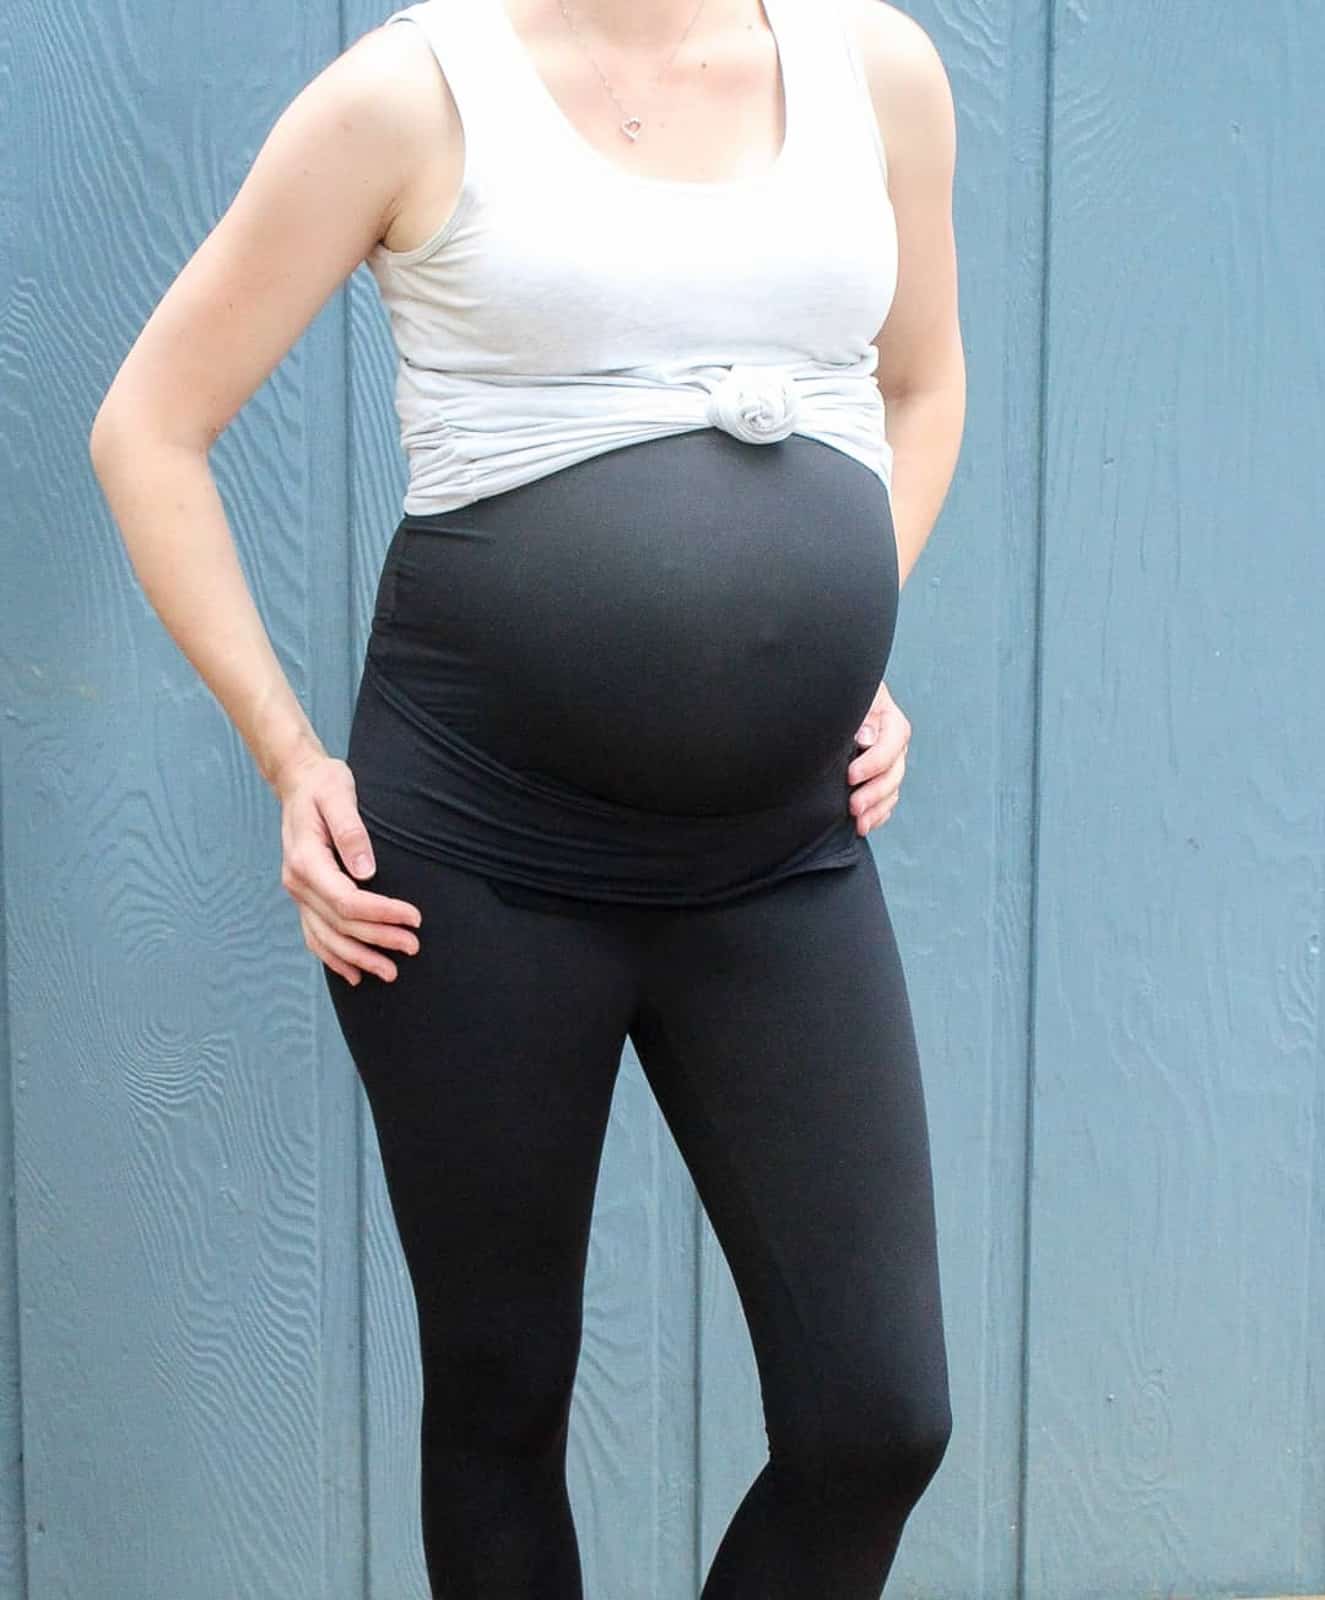 Pregnant woman wears maternity leggings during final trimester.